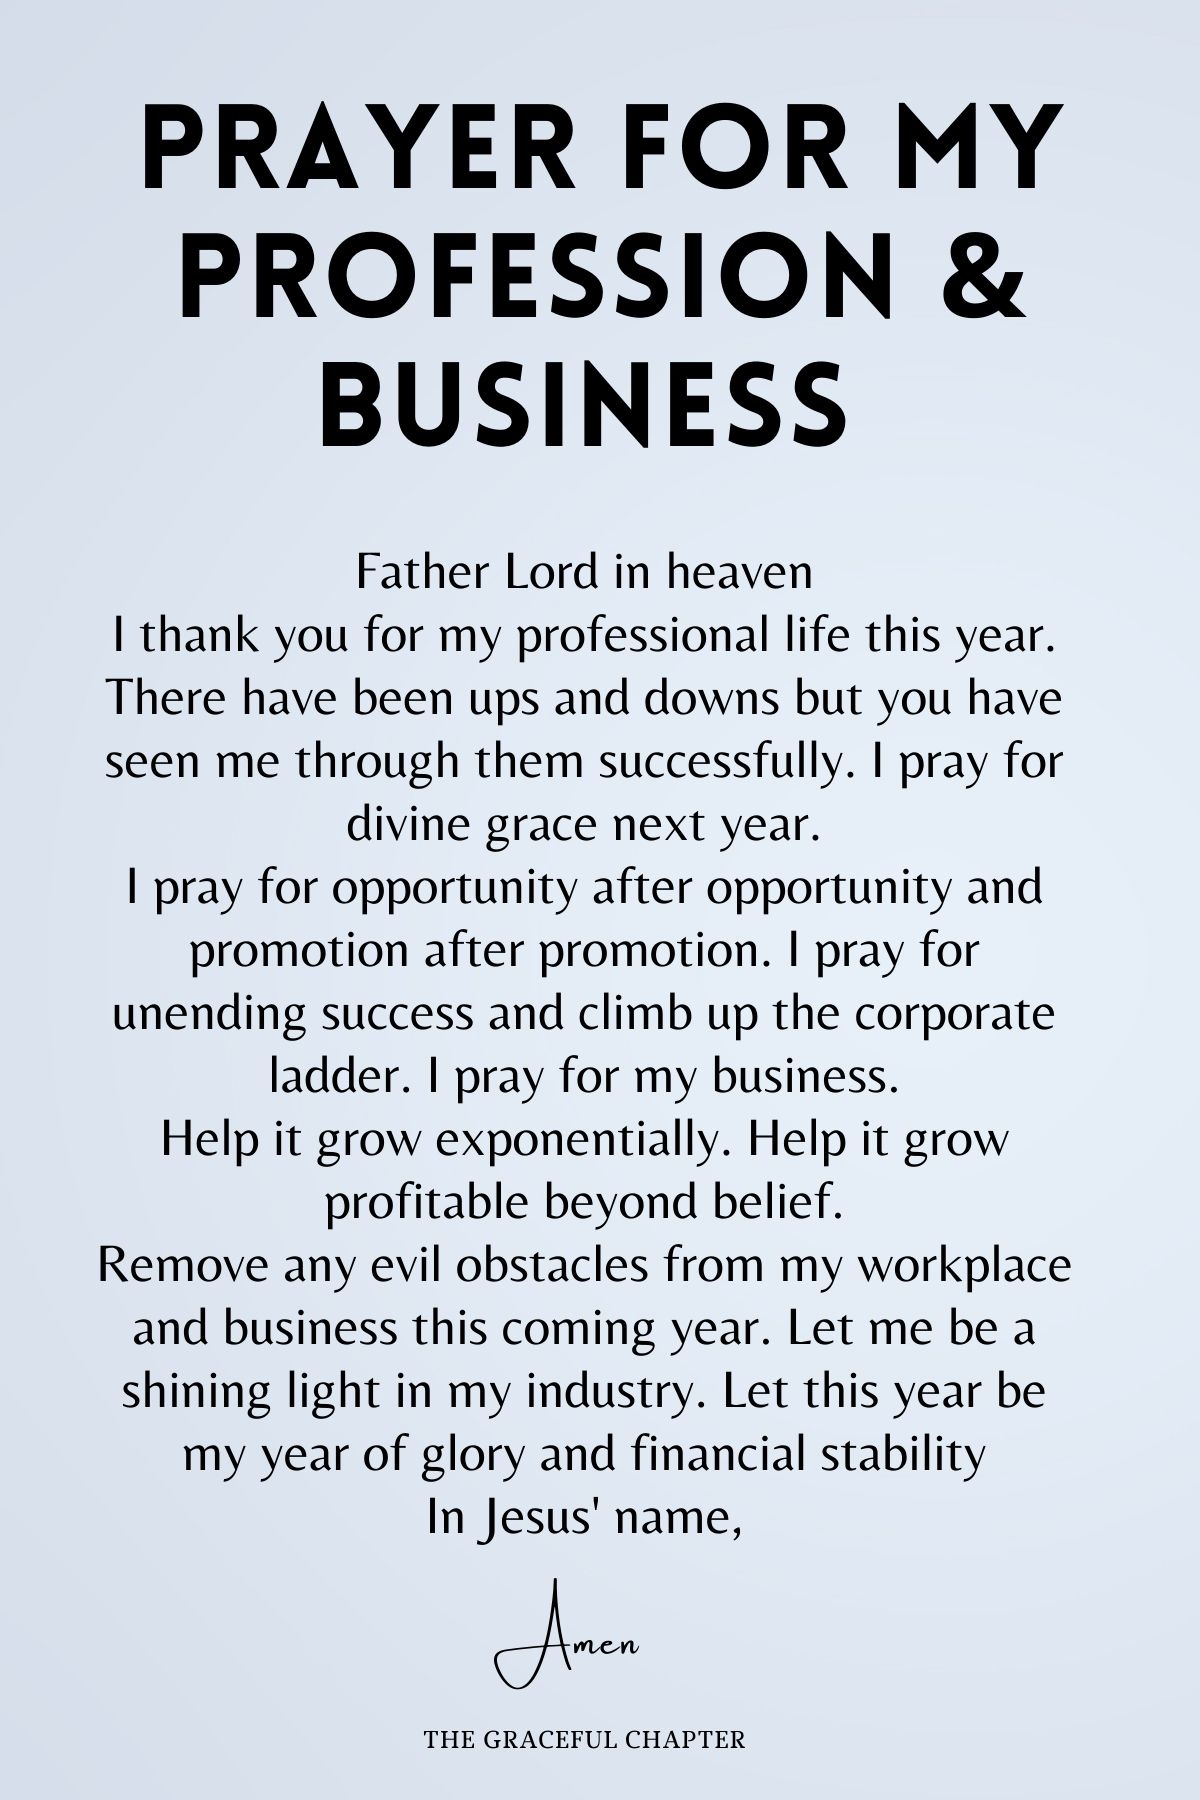 Prayer for Profession & Business - things to pray about in 2022